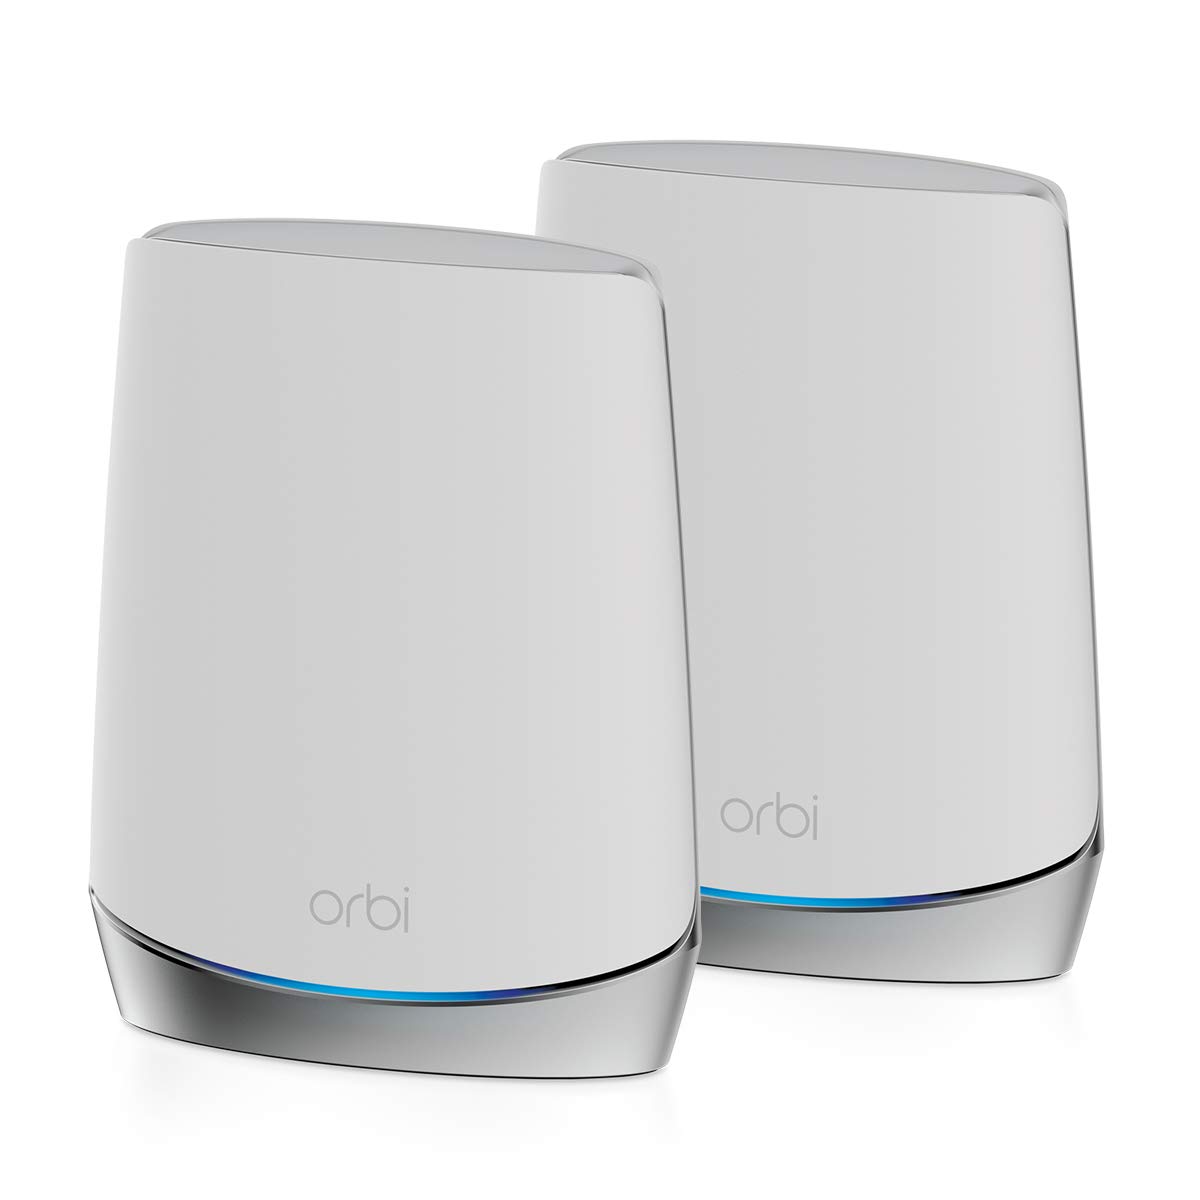 Amazon.com: NETGEAR Orbi Whole Home Tri-band Mesh WiFi 6 System (RBK752) – Router with 1 Satellite Extender AX4200 $204.99